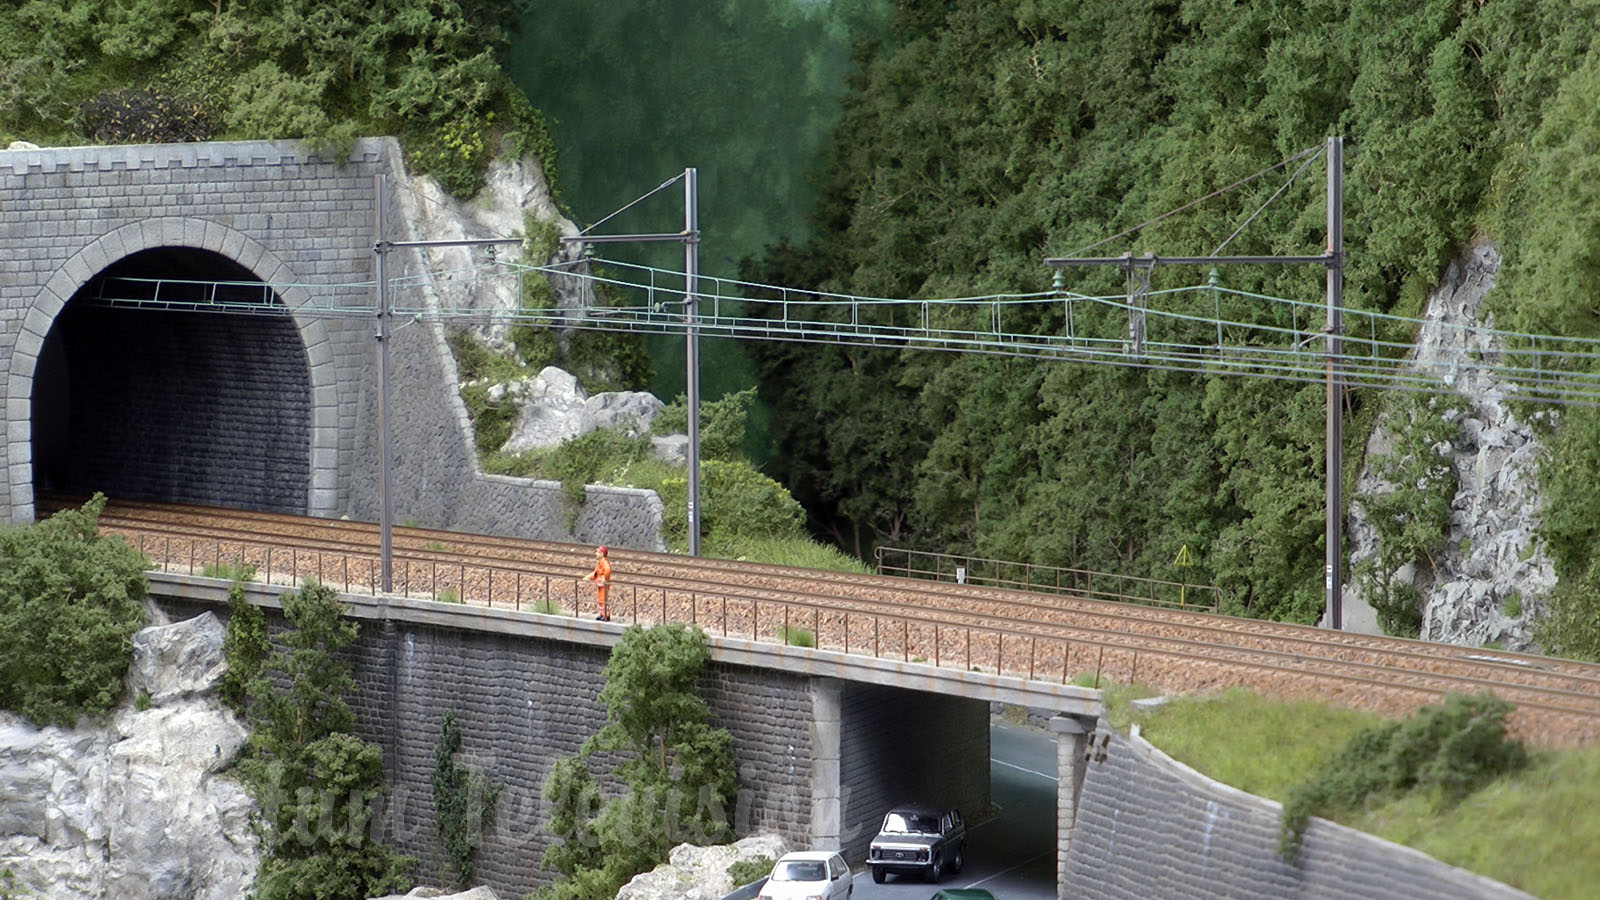 One of the nearly realistic French model railway layouts - HO scale model trains of SNCF in France